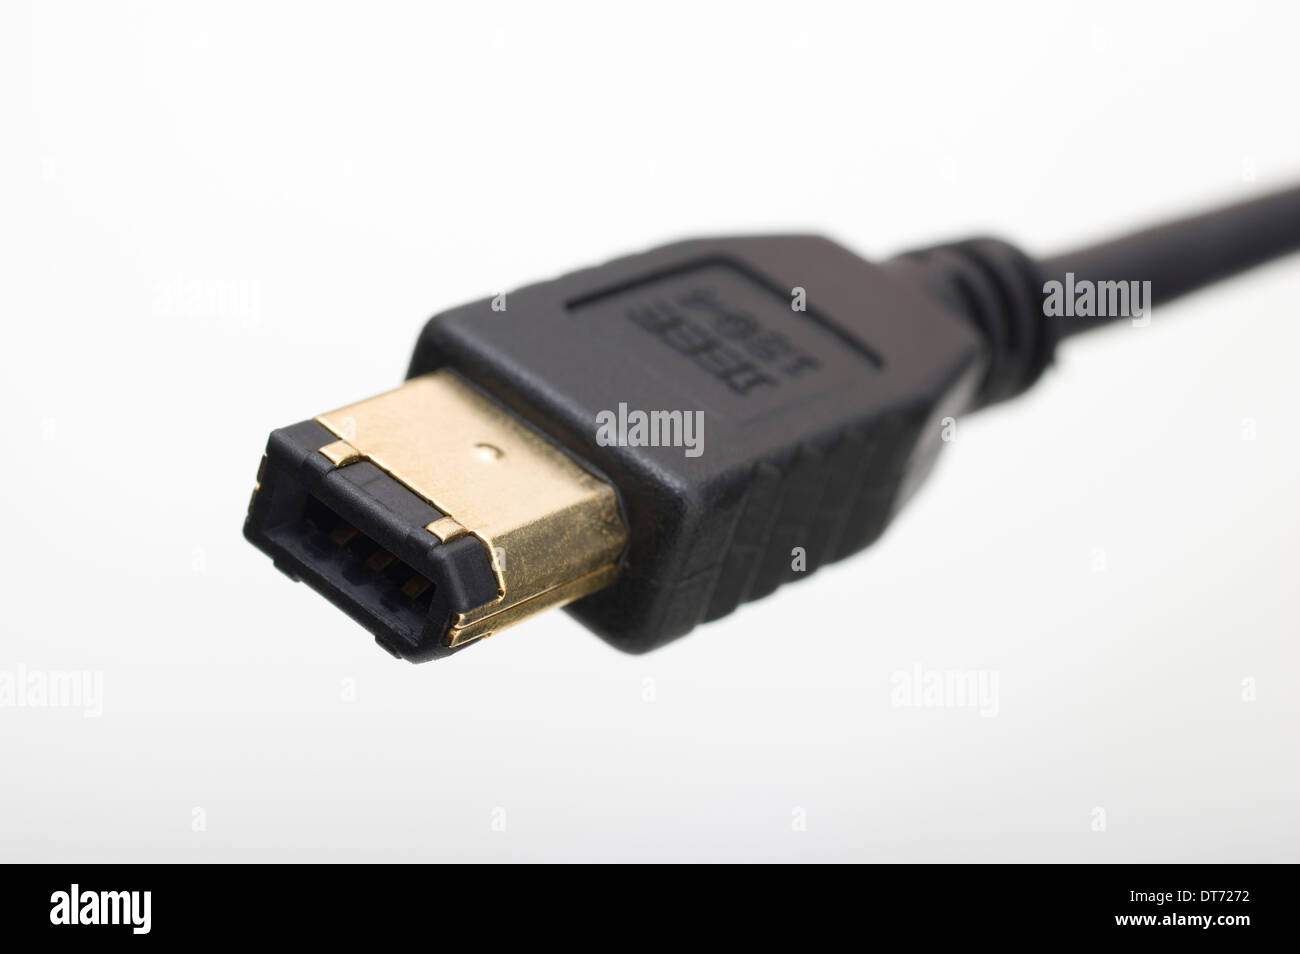 6-conductor FireWire 400 IEEE 1394-1995 cable Stock Photo